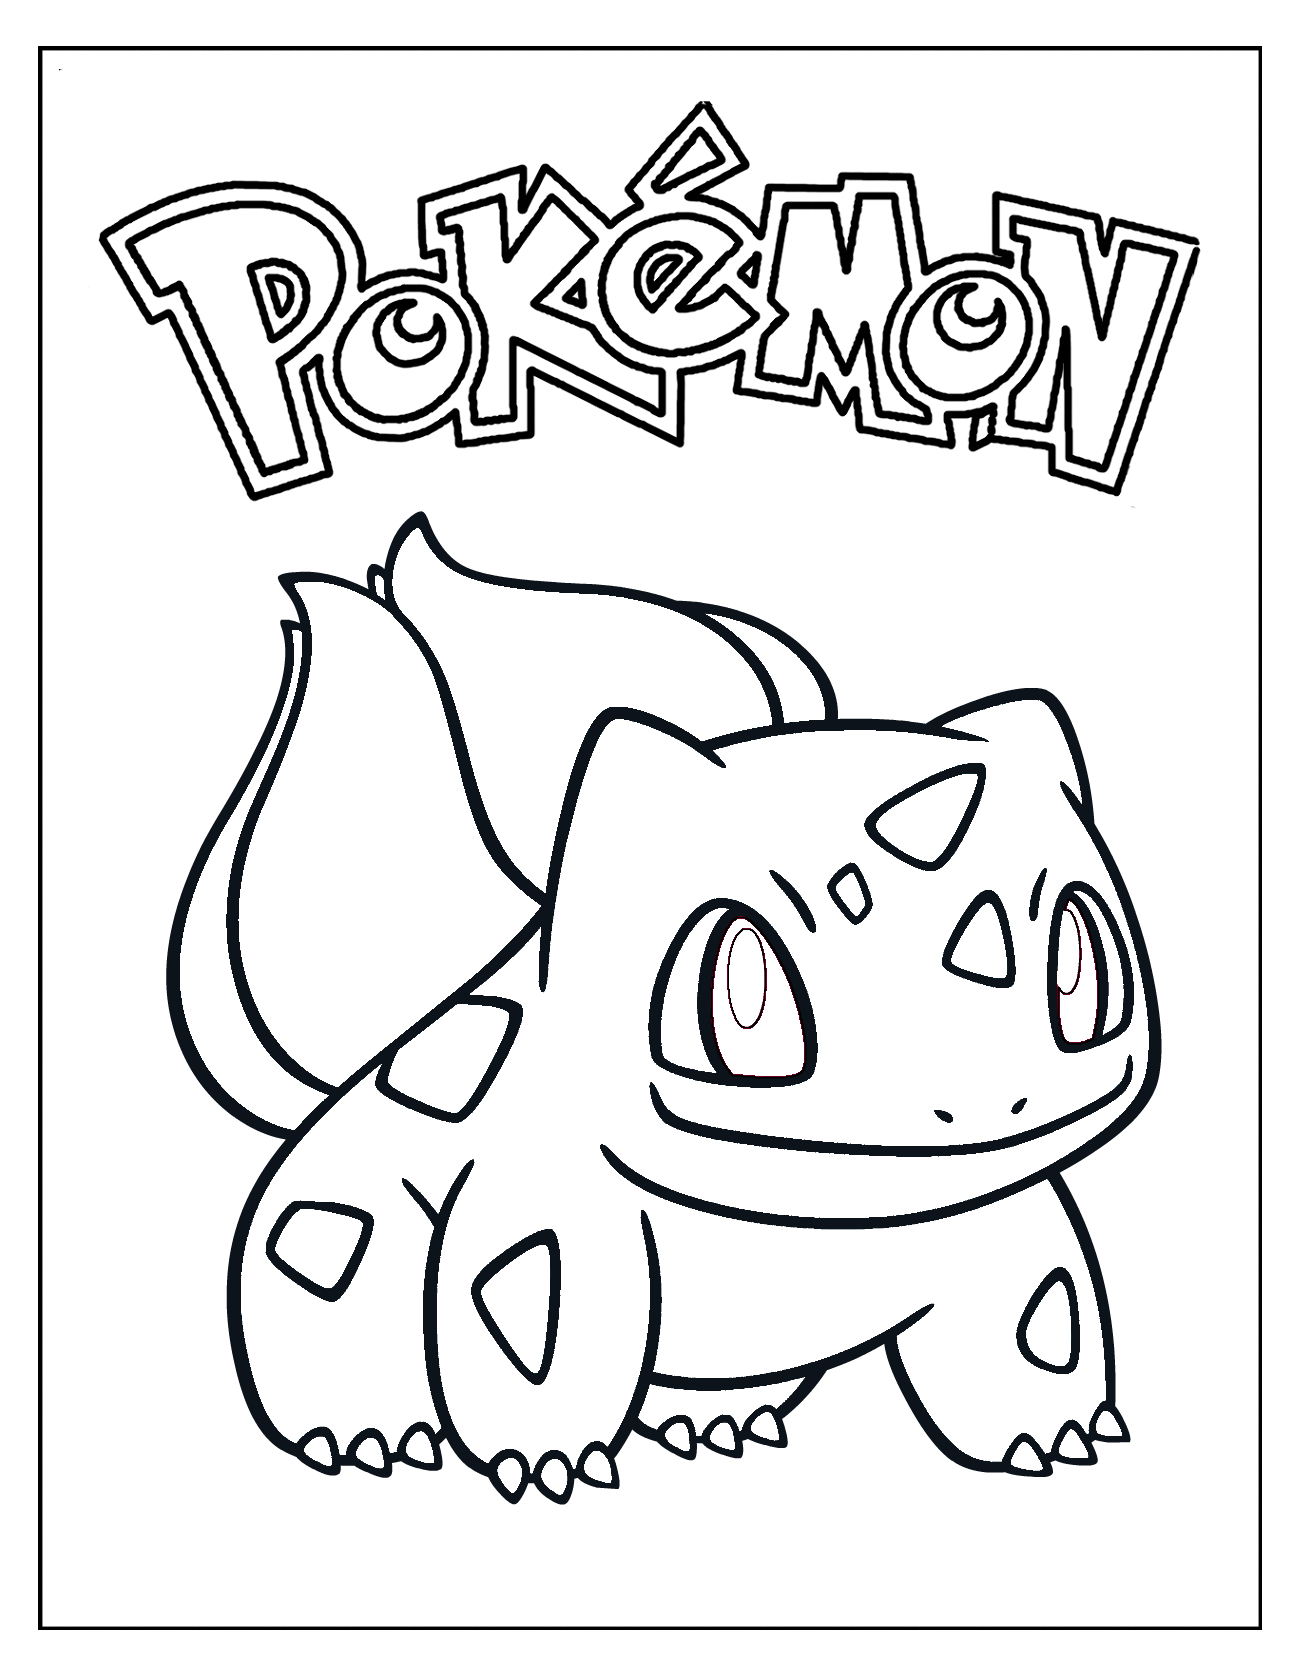 Pikachu Libre Coloring Page Bulbasaur Pokemon Coloring Pages At Getdrawings Free For